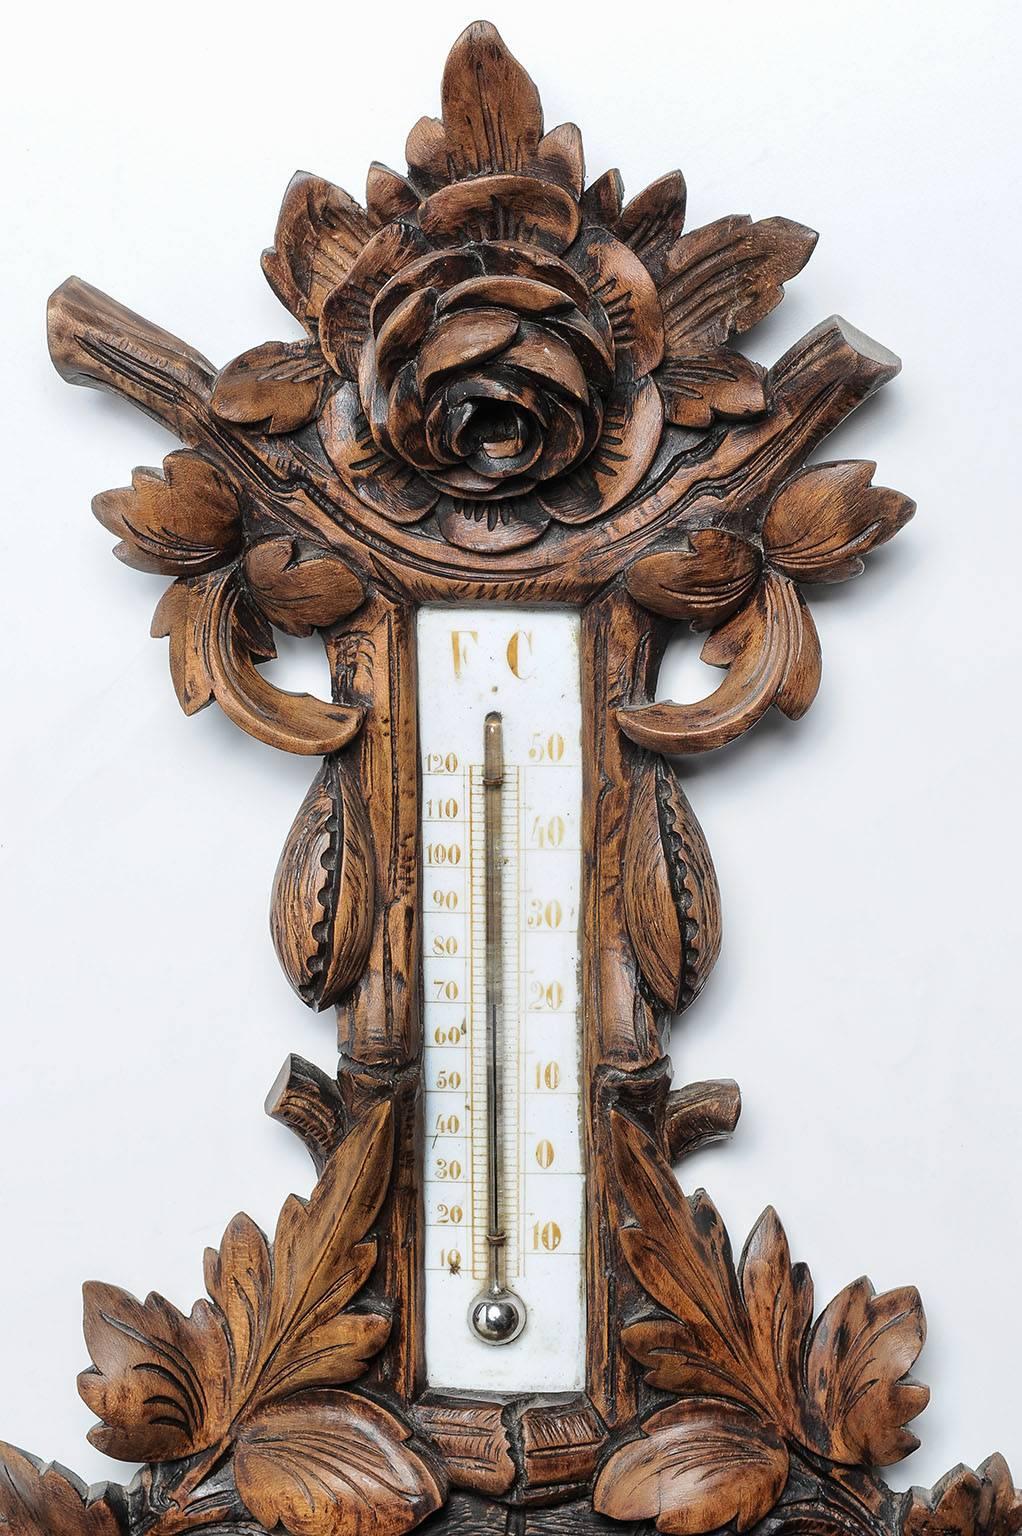 German Black Forest Old Barometer and Thermometer like a Wall Sculpture